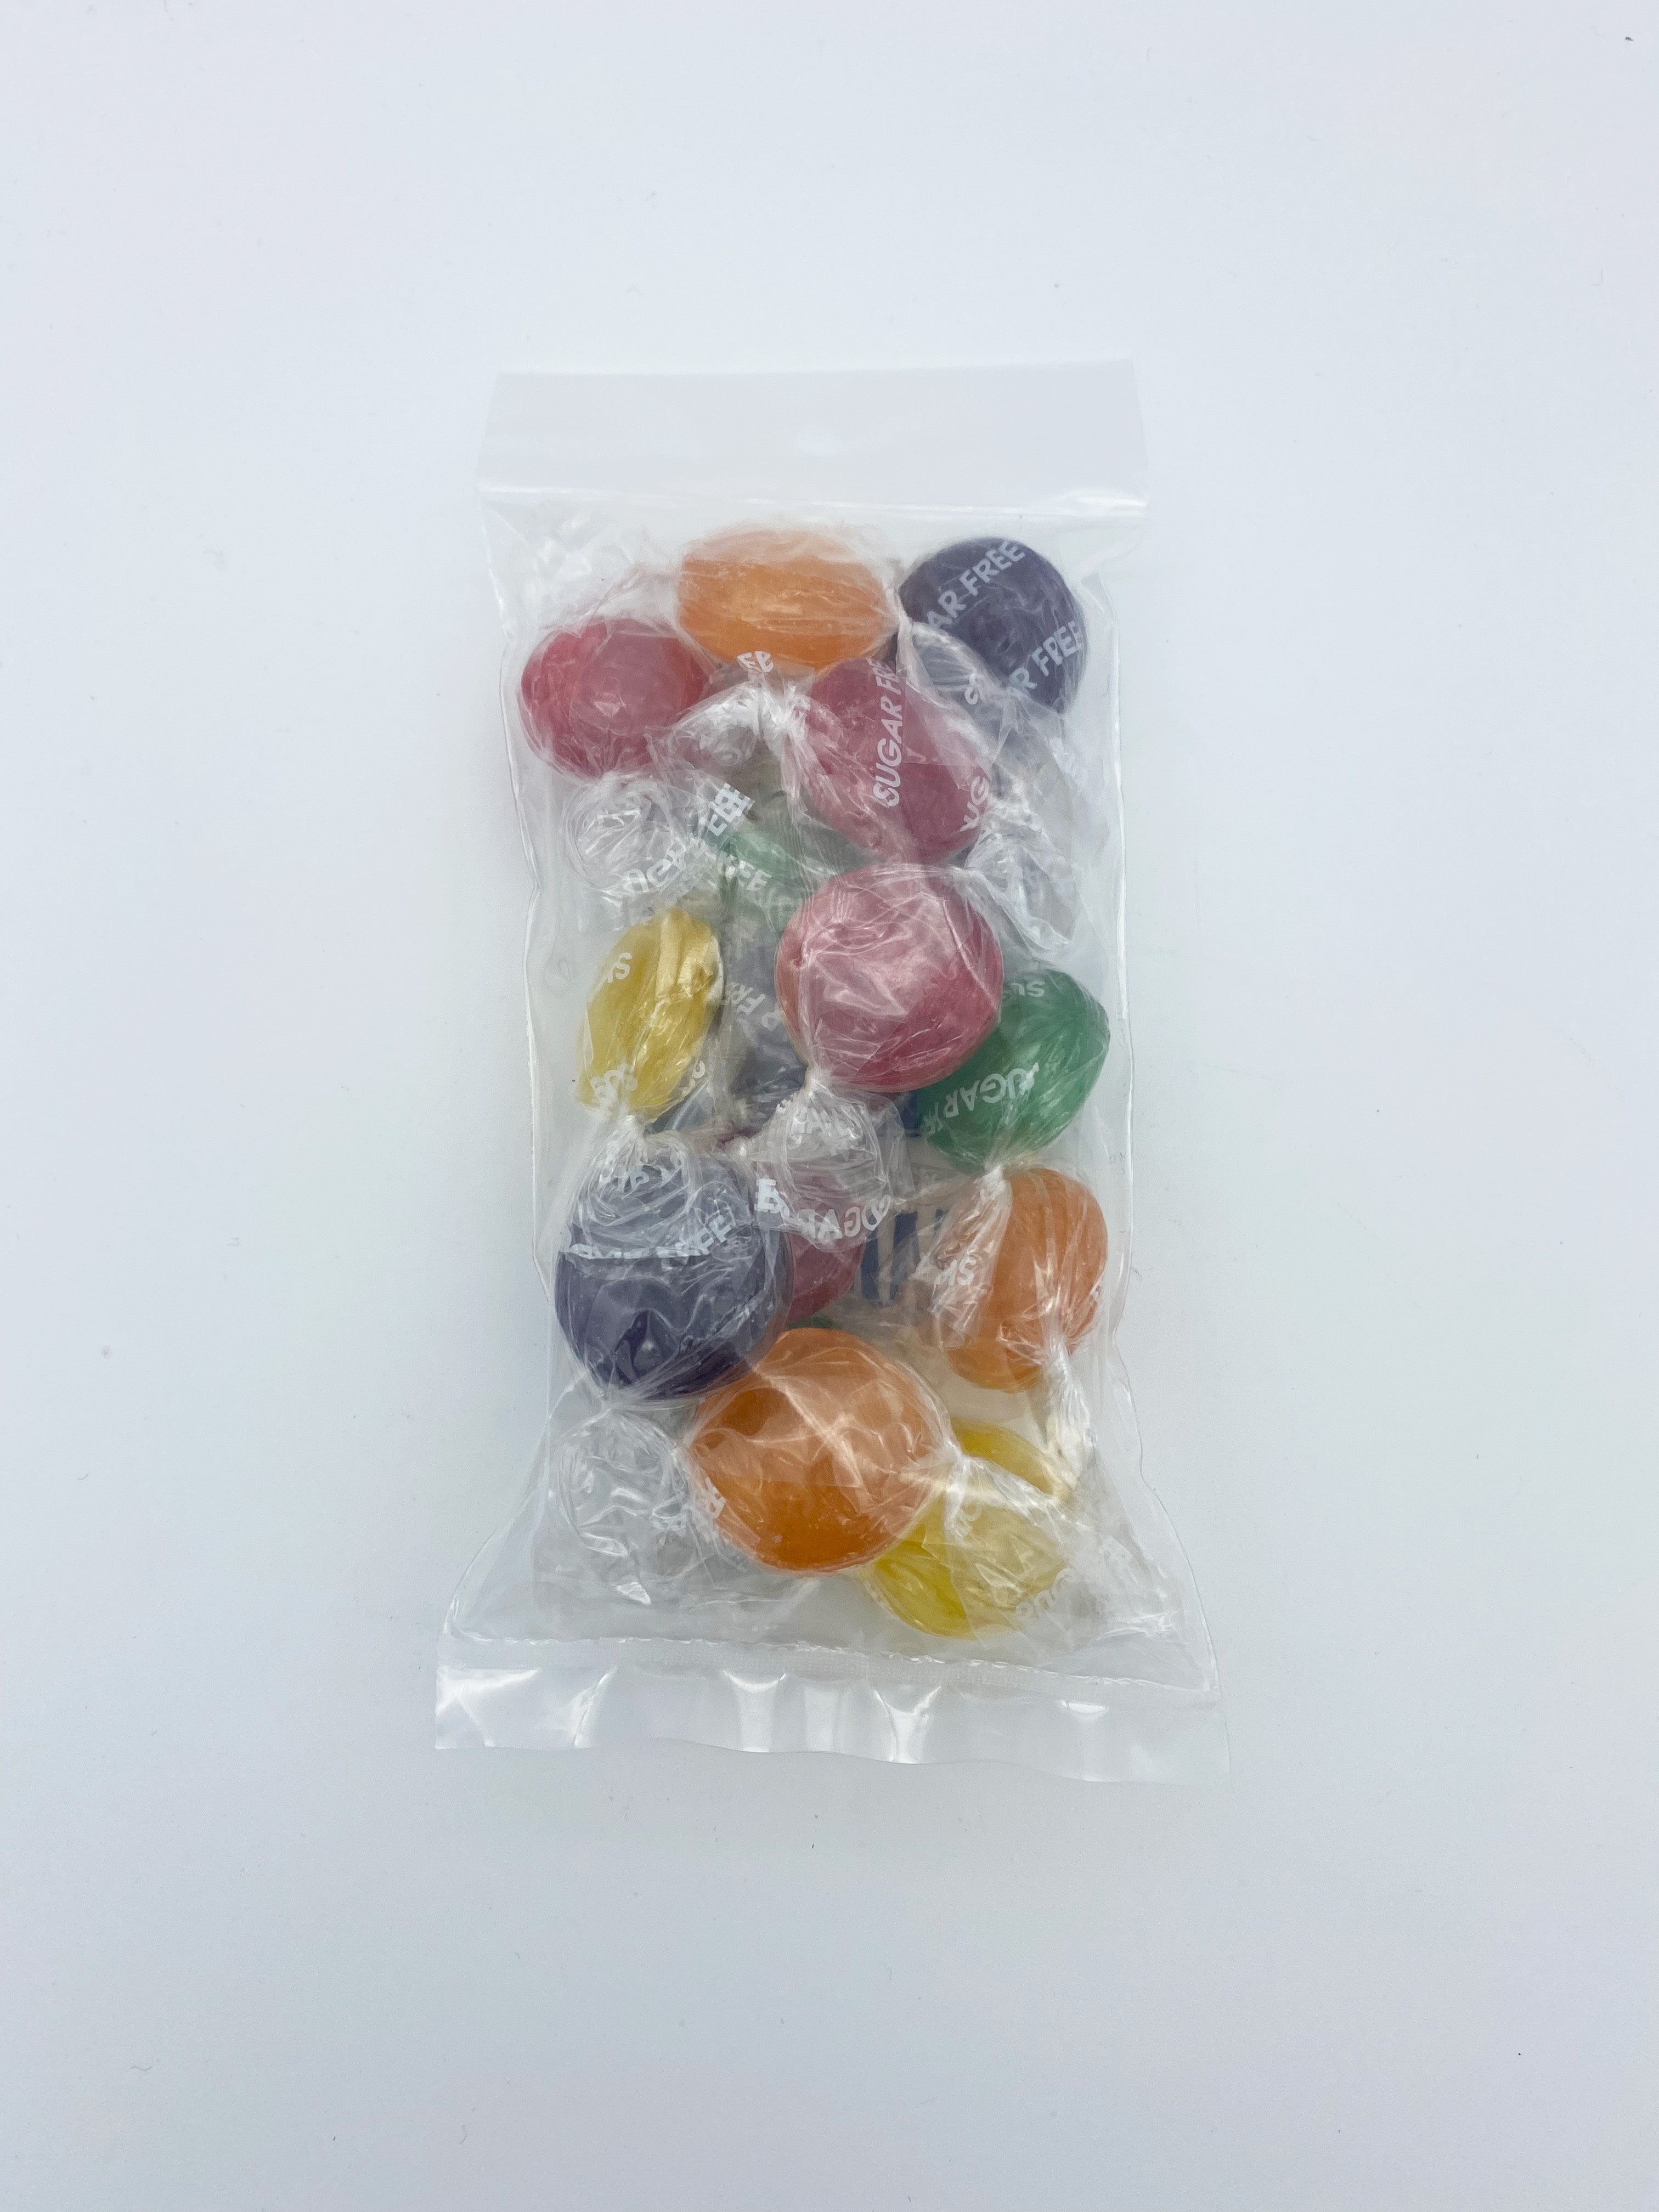 SUGAR FREE ASSORTED FRUIT BUTTONS